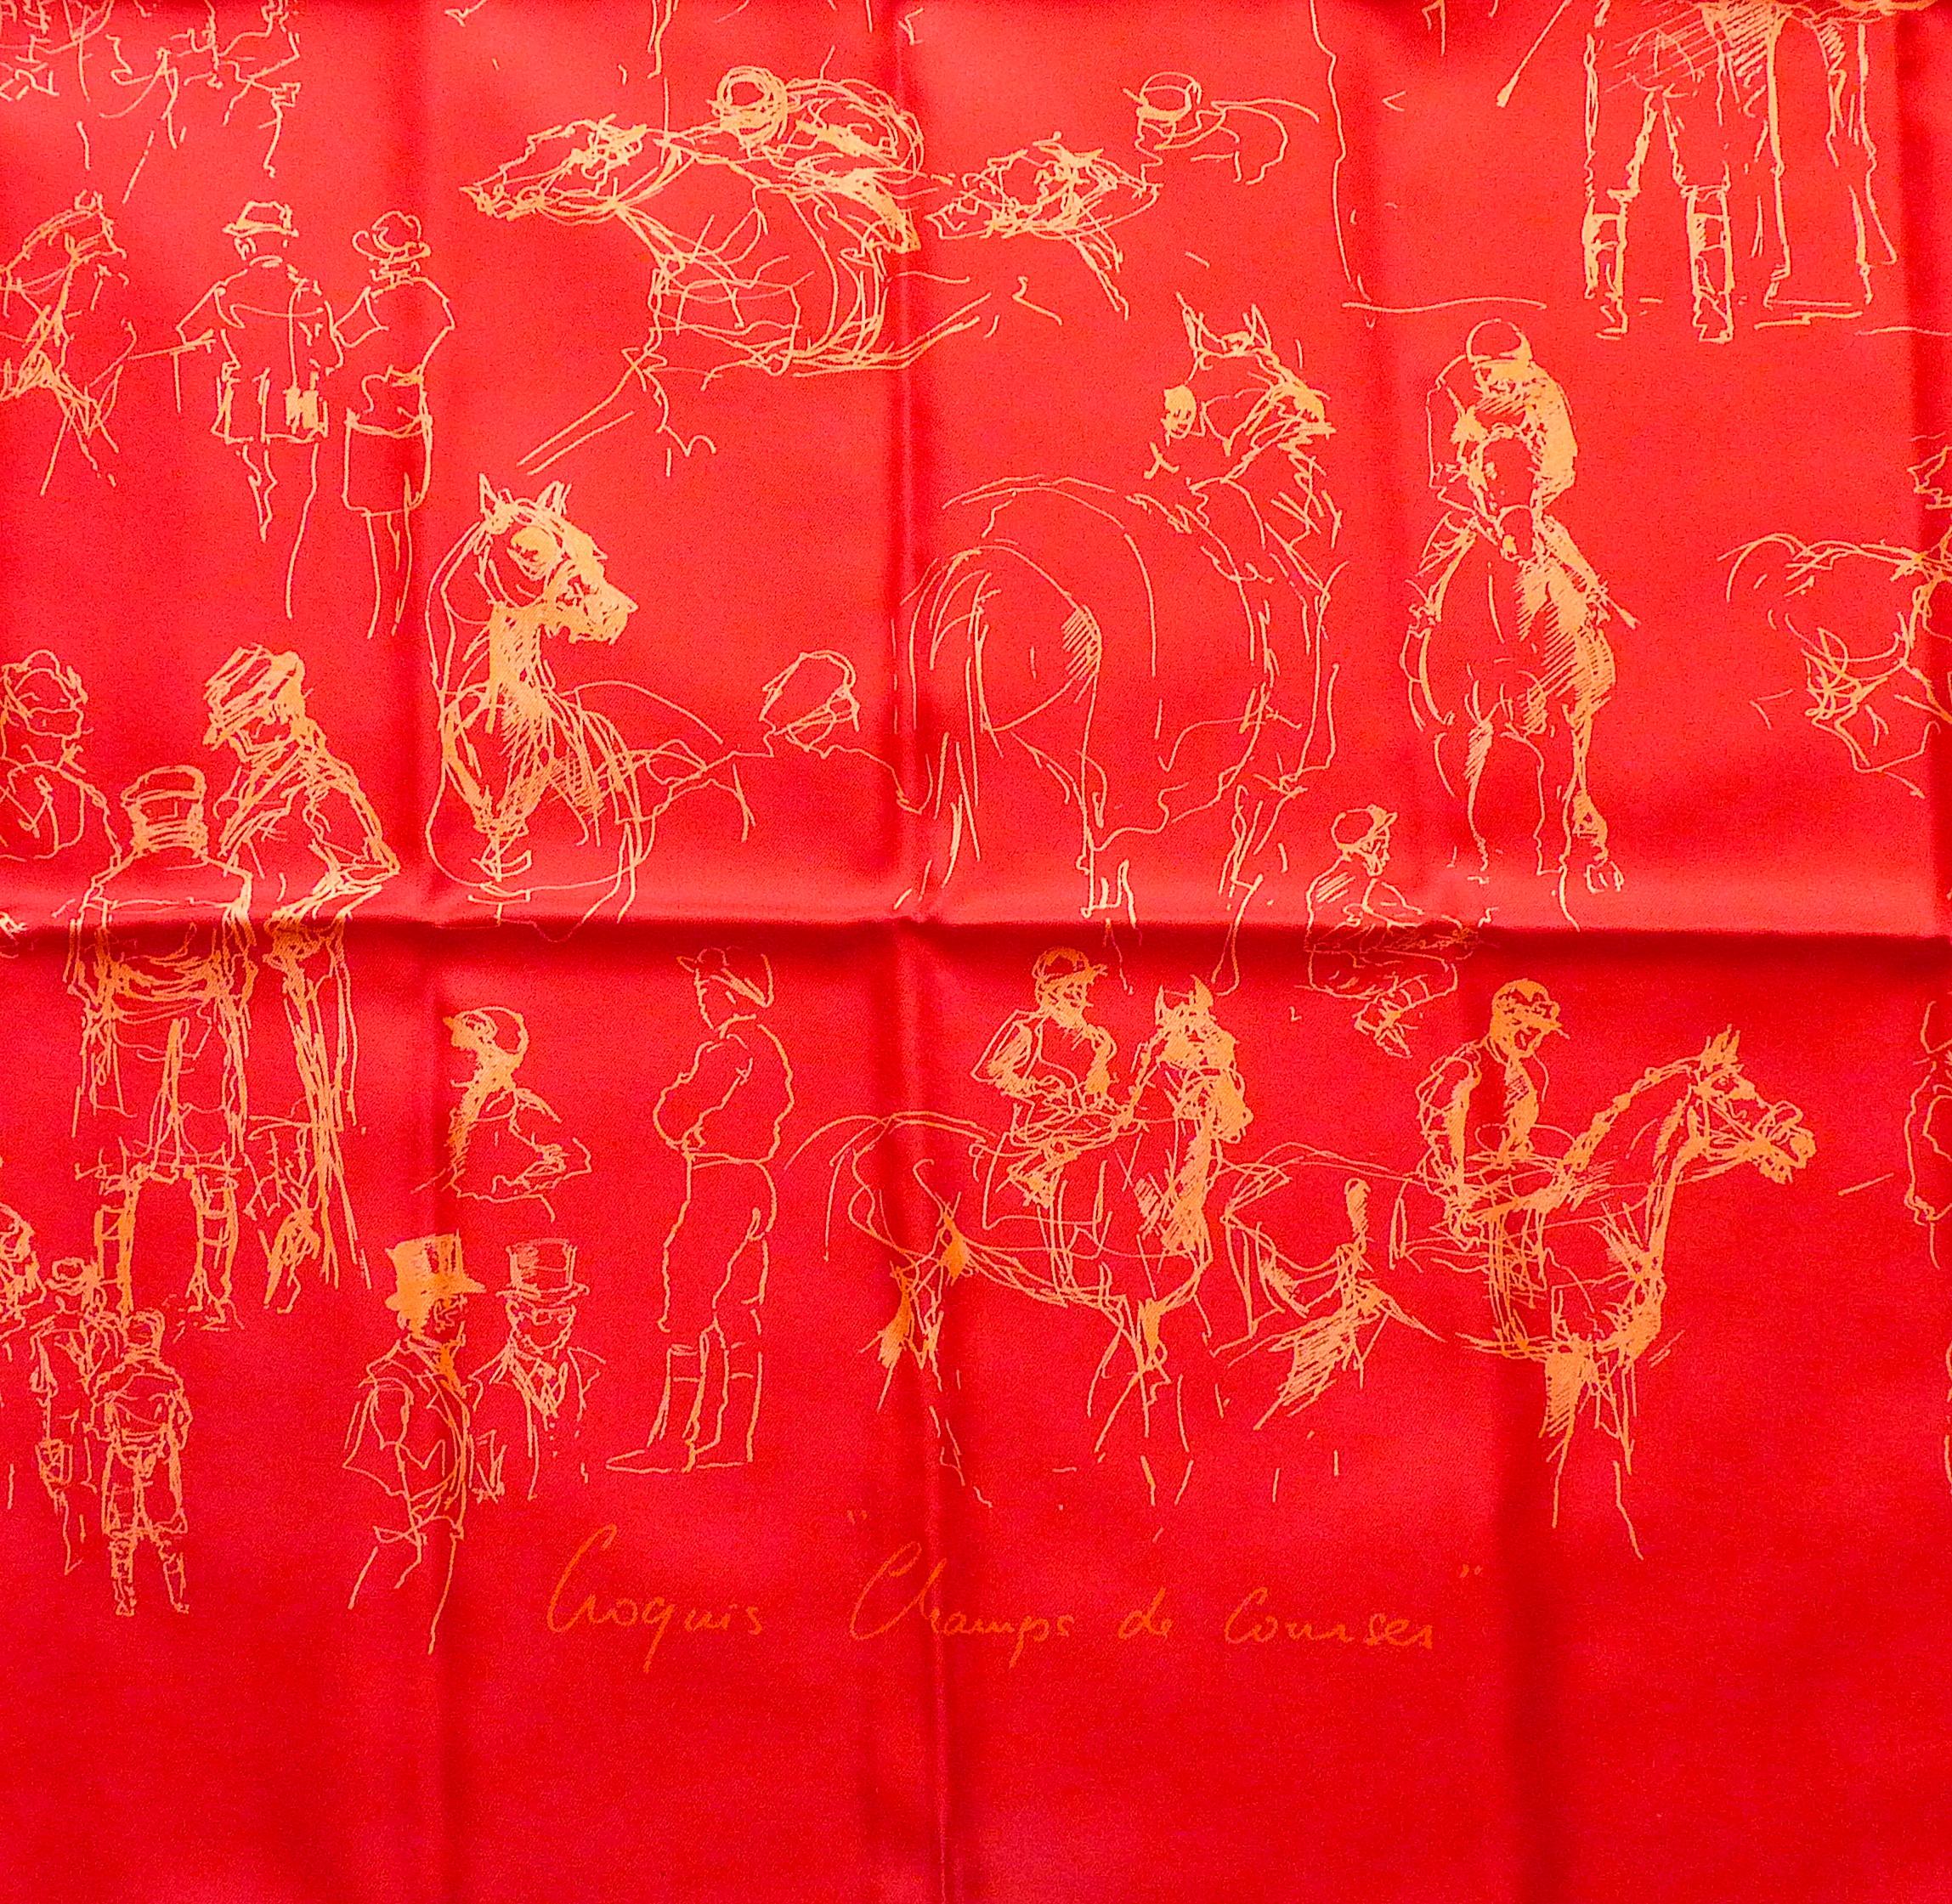 HERMES Scarf Croquis Champ de Course by Hubert de Watrigant, very sought after design, 1 single edition from 2007, Pristine Condition ! Unworn !

Red Background, Pale Pink Pattern

CONDITION : Pristine Condition ! Unworn !

Very Hard to find in such